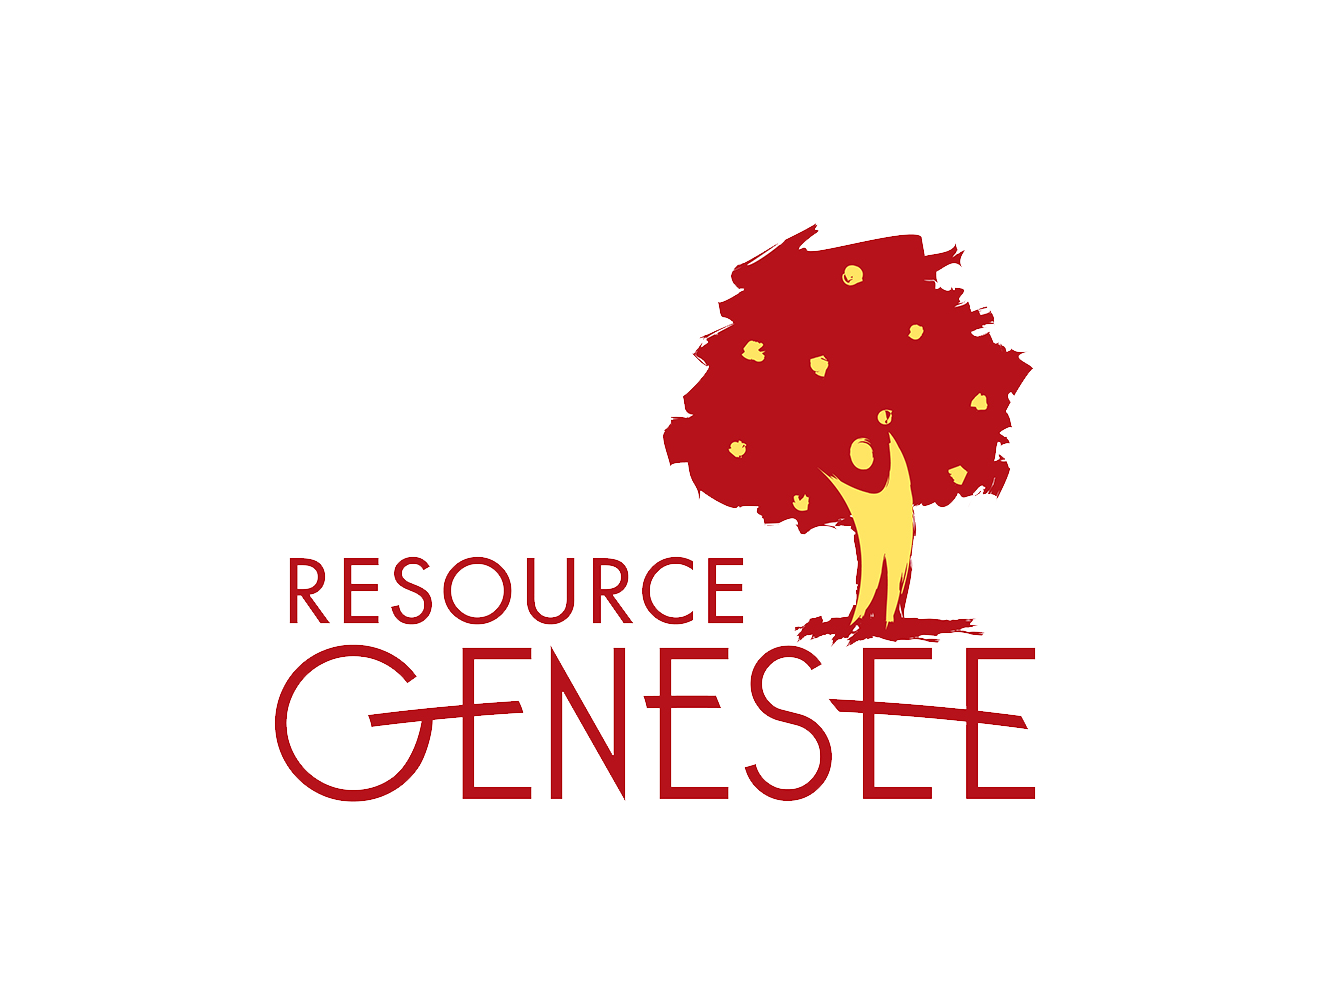 Resource Genesee logo, two color version